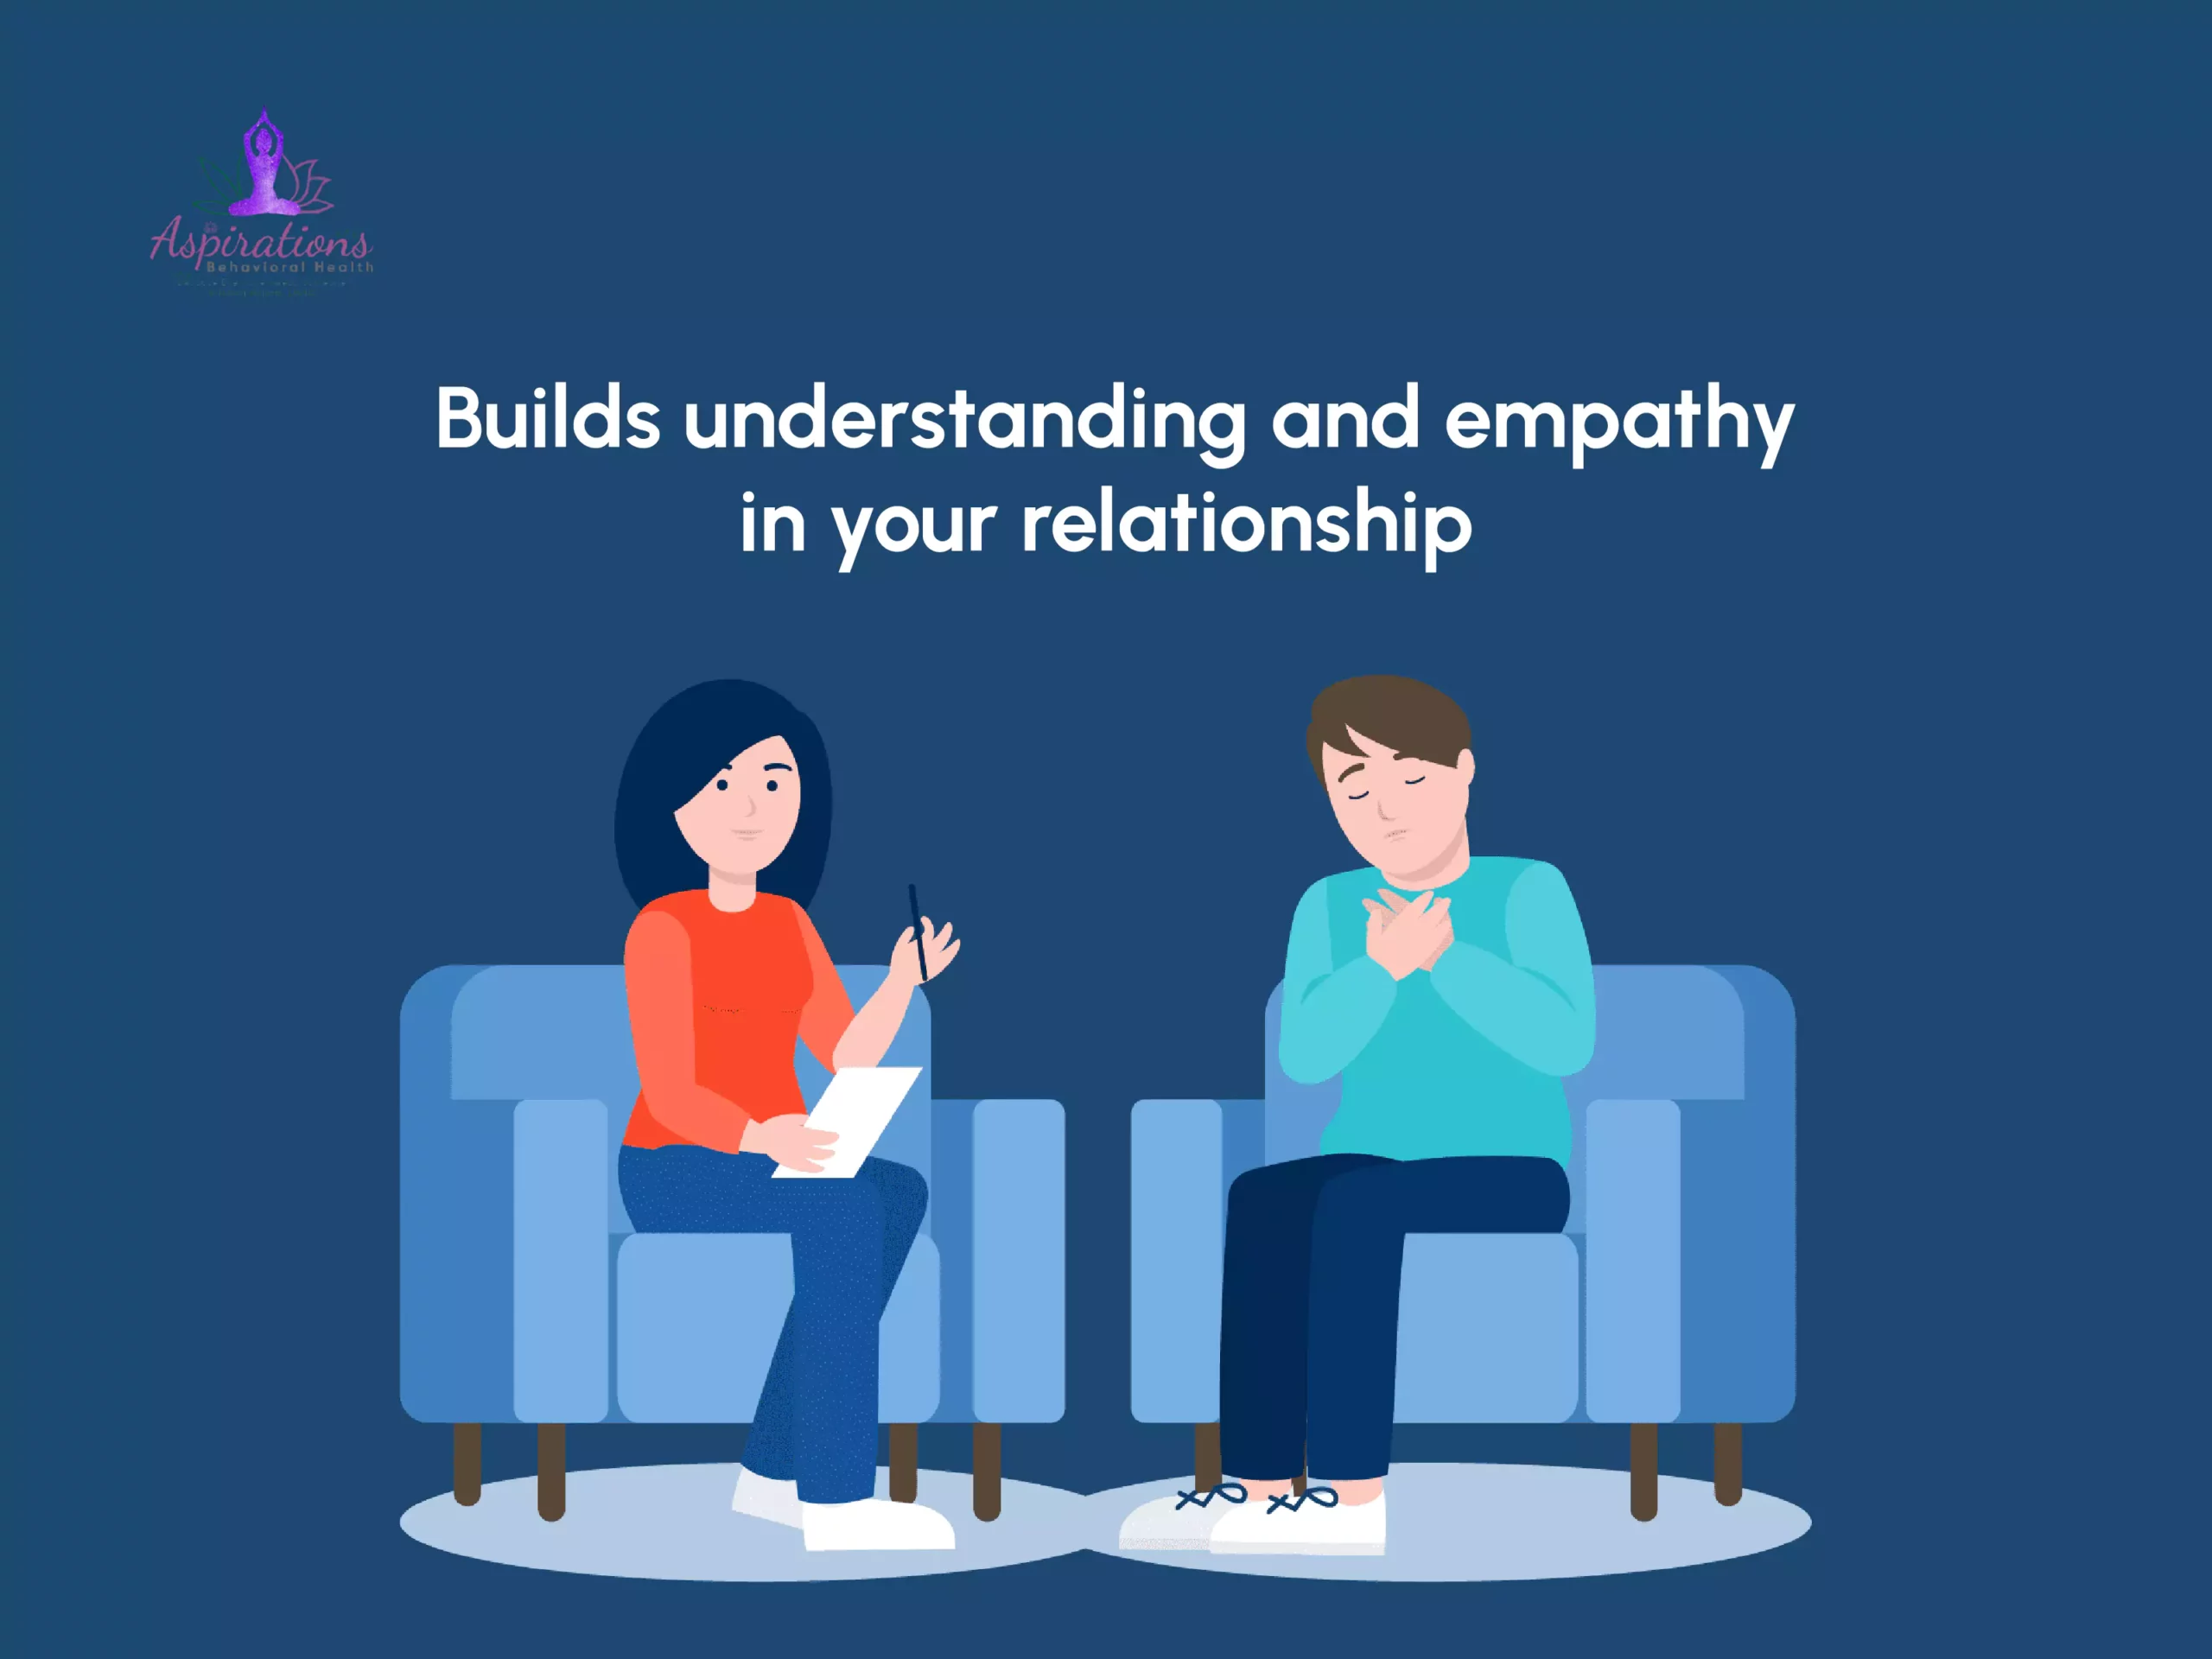 Builds understanding and empathy in your relationship